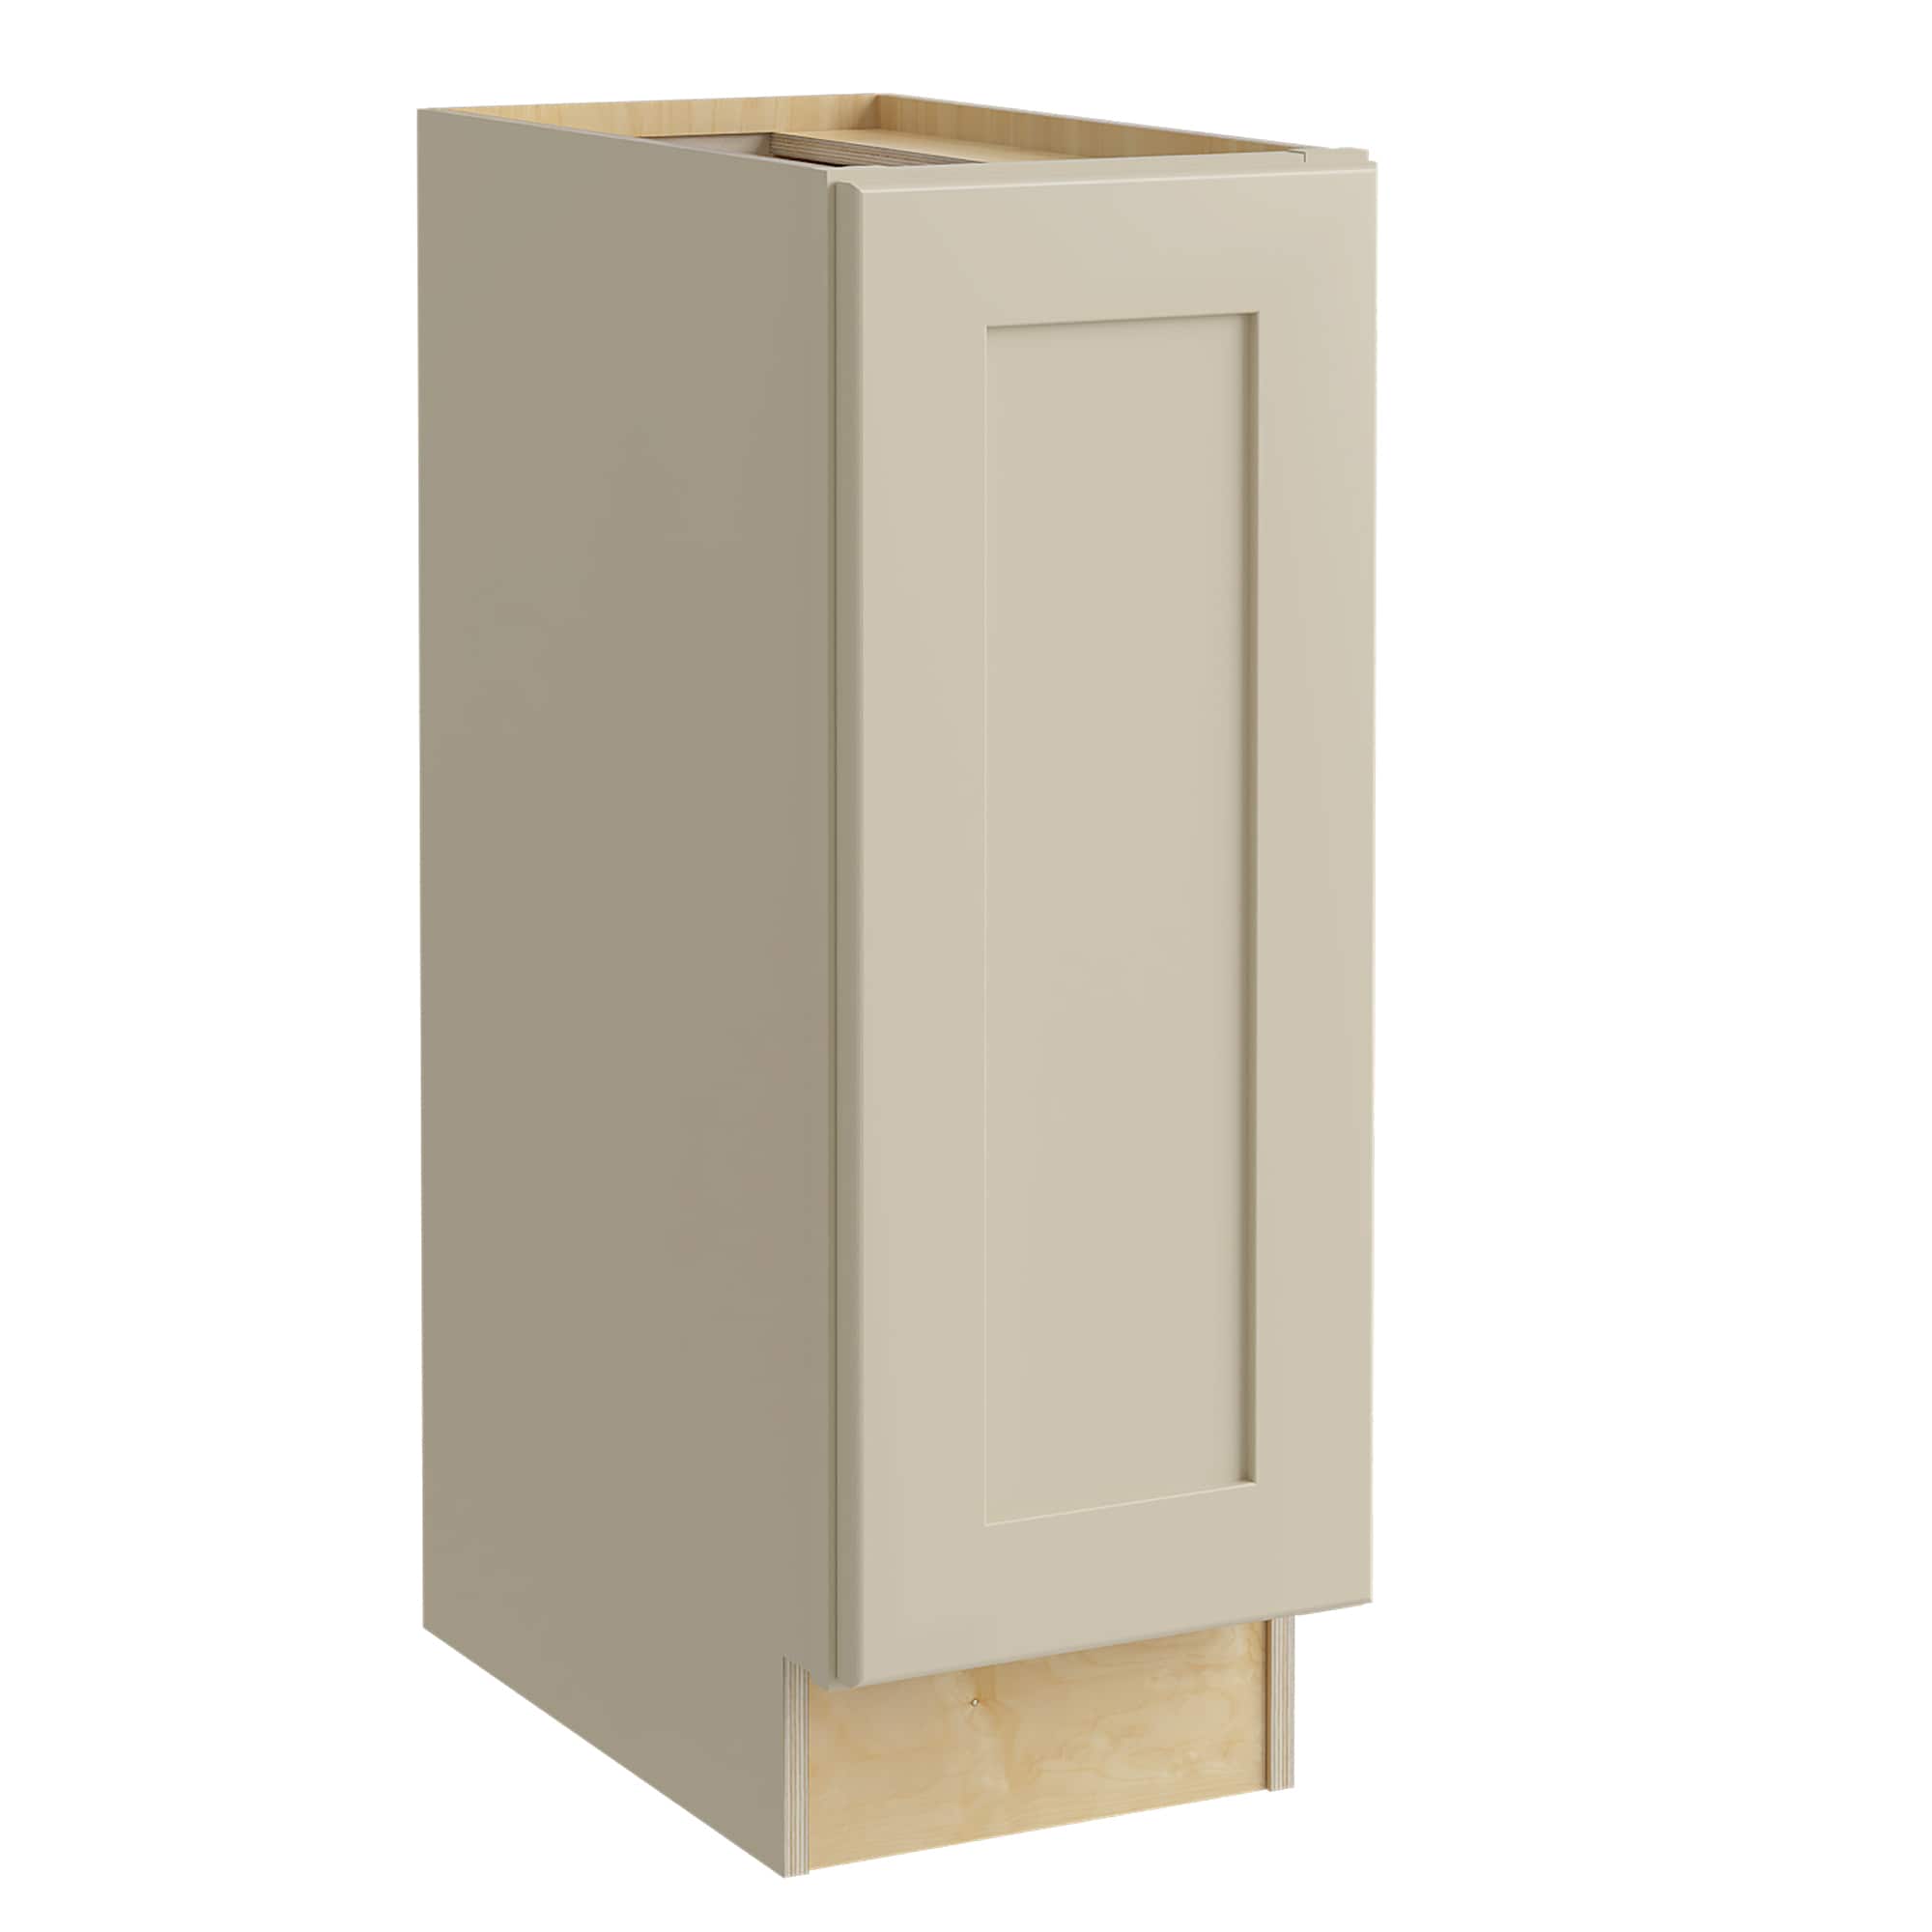 Luxxe Cabinetry 15-in W x 34.5-in H x 21-in D Norfolk Blended Cream Painted Door Base Fully Assembled Semi-custom Cabinet in Off-White | VB1521FHL-NBC